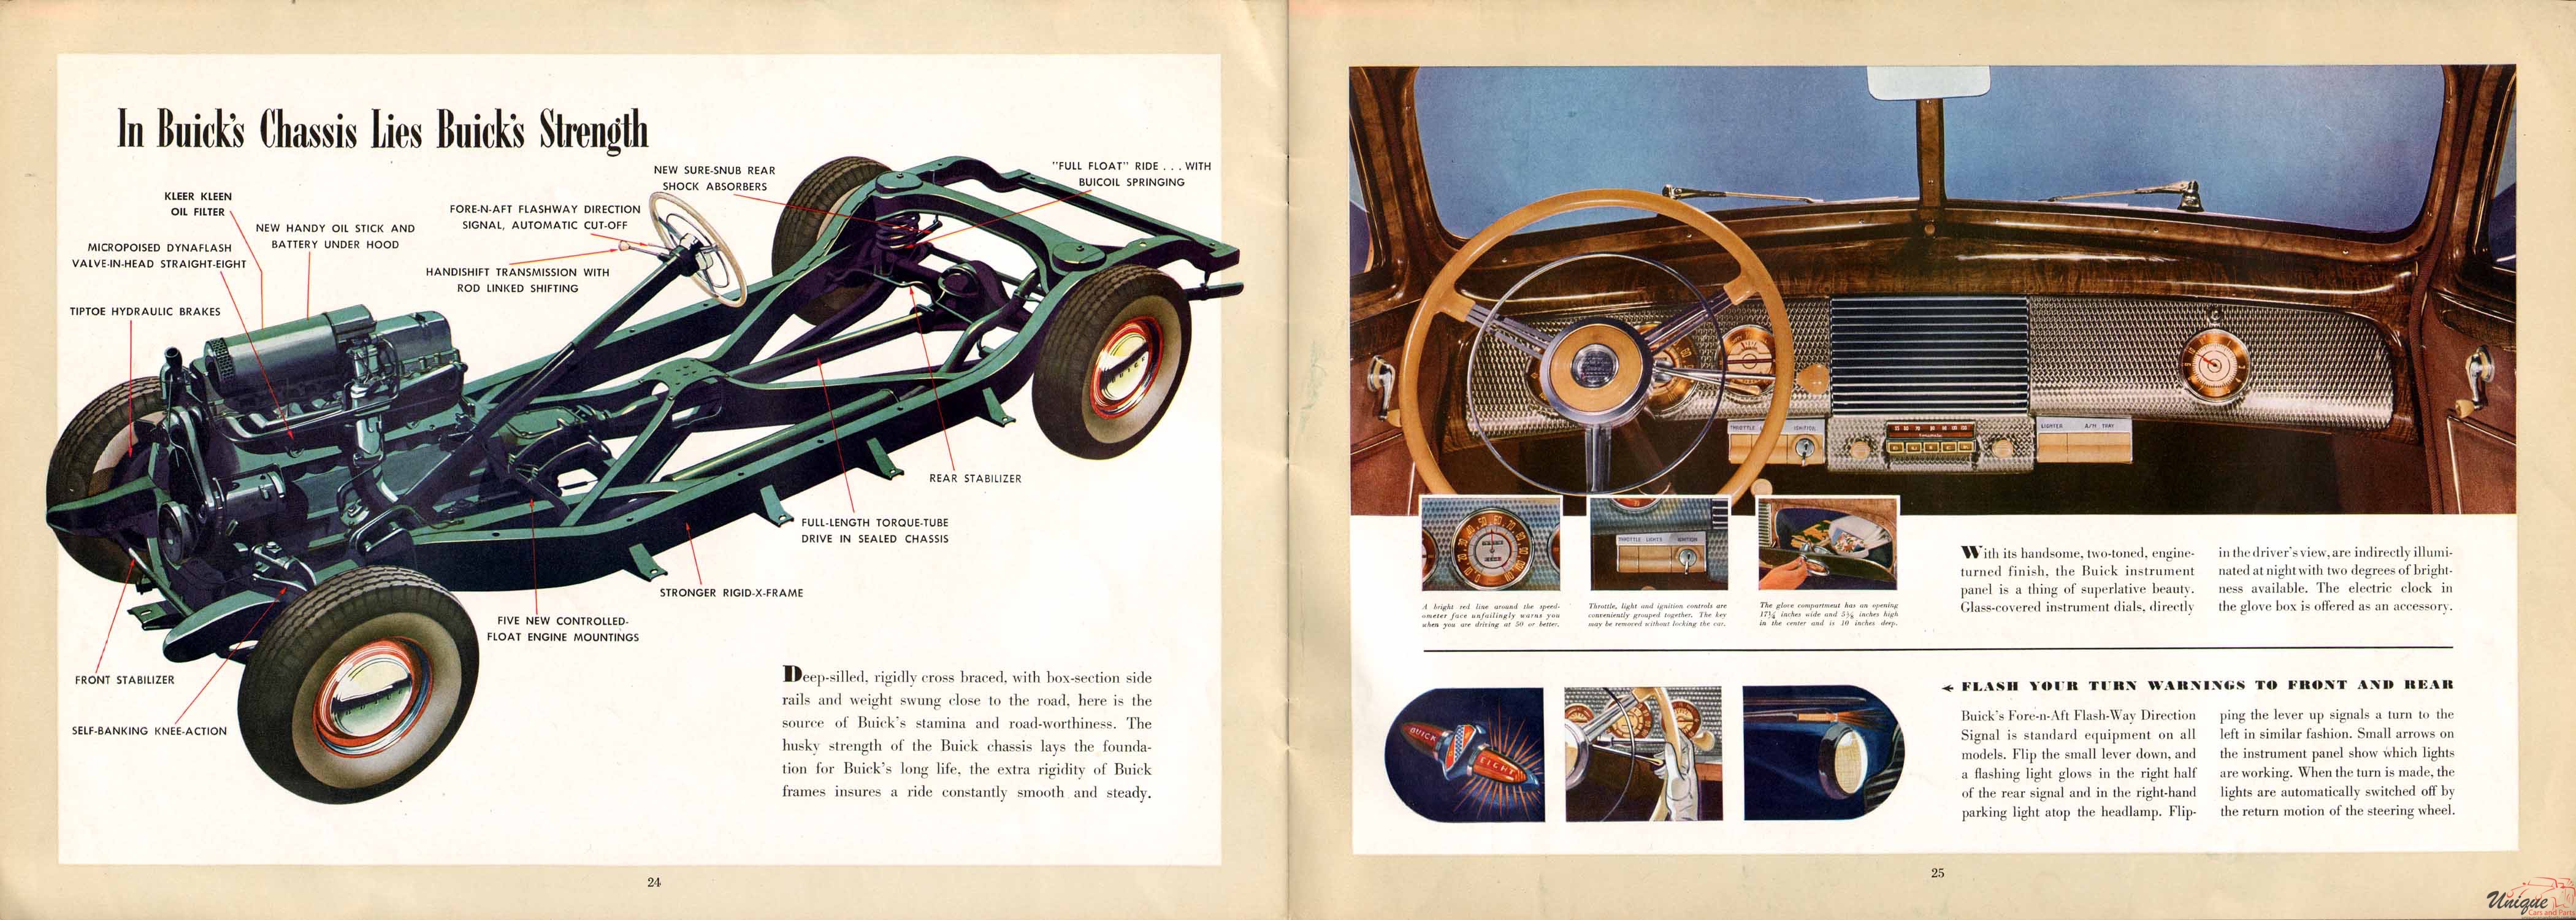 1940 Buick Brochure Page 9